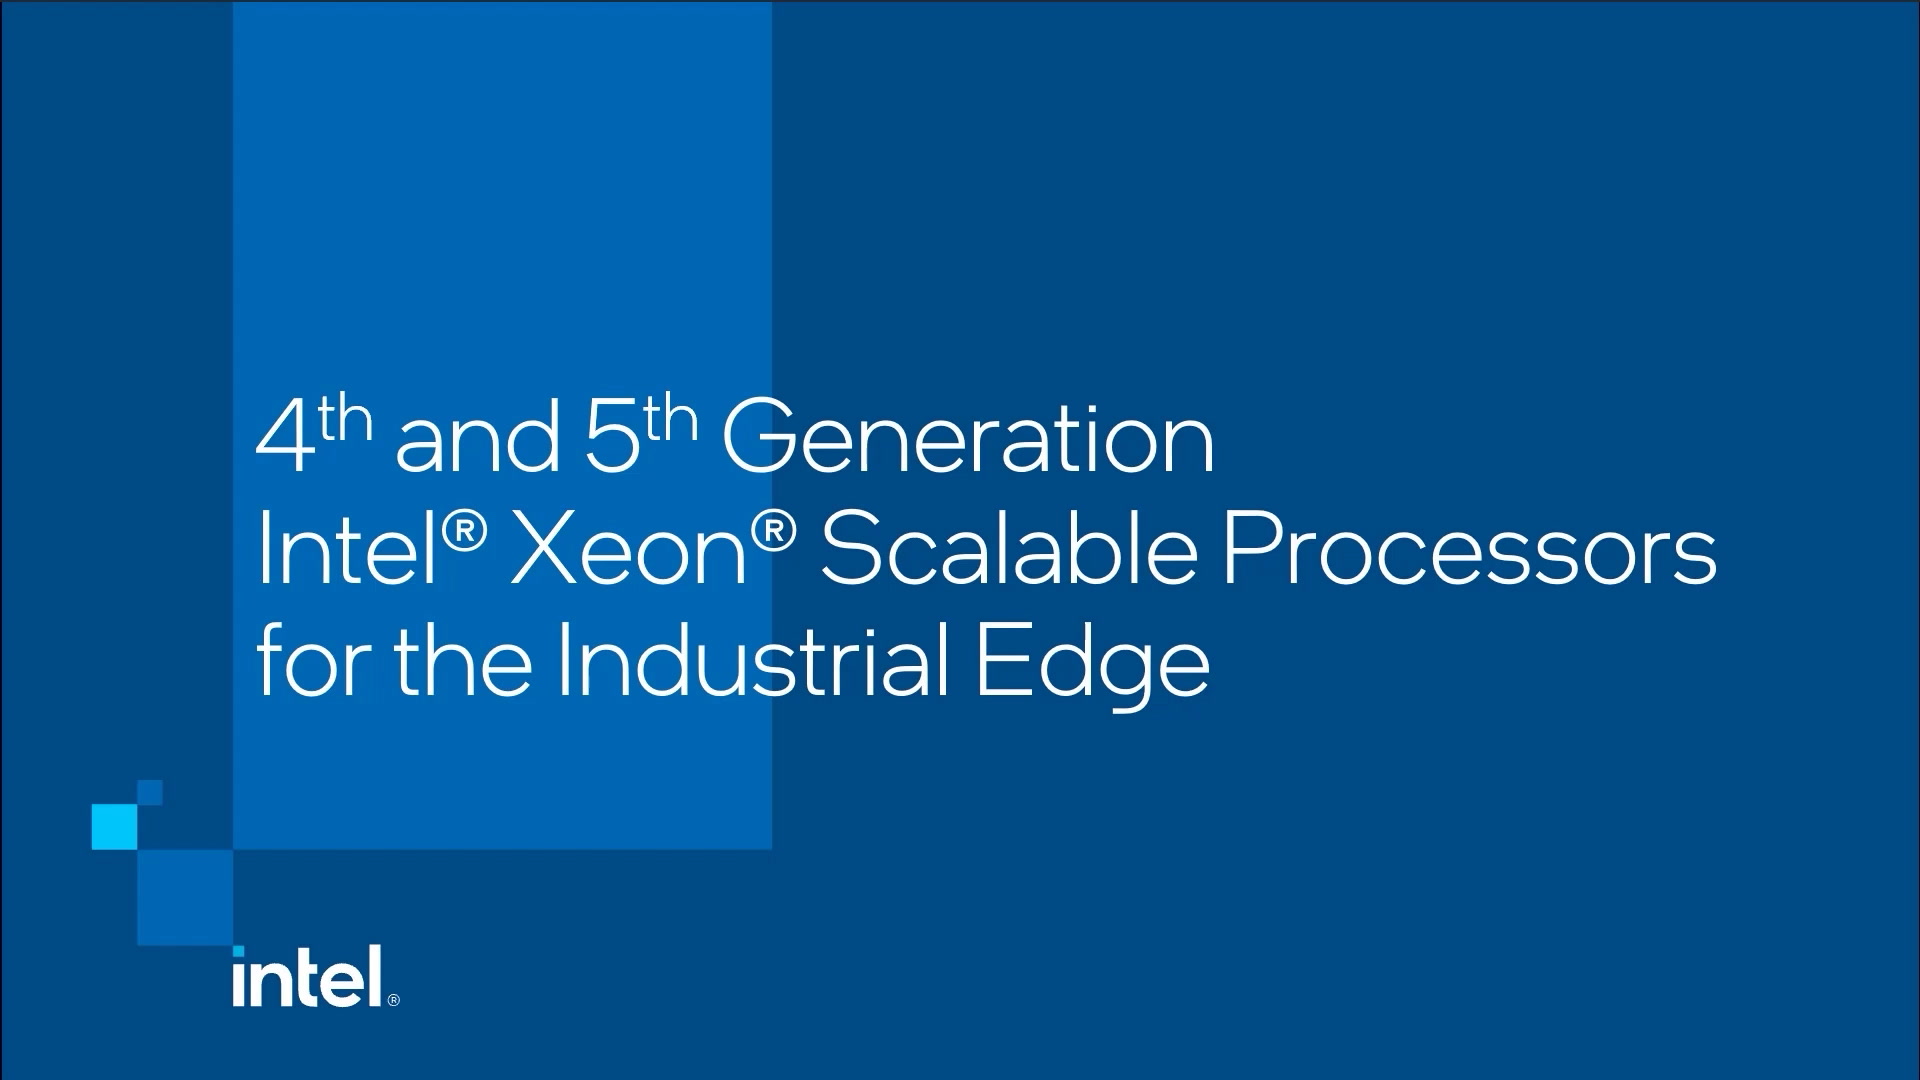 Chapter 1 : 4th and 5th Generation Intel® Xeon® Scalable Processors for the Industrial Edge